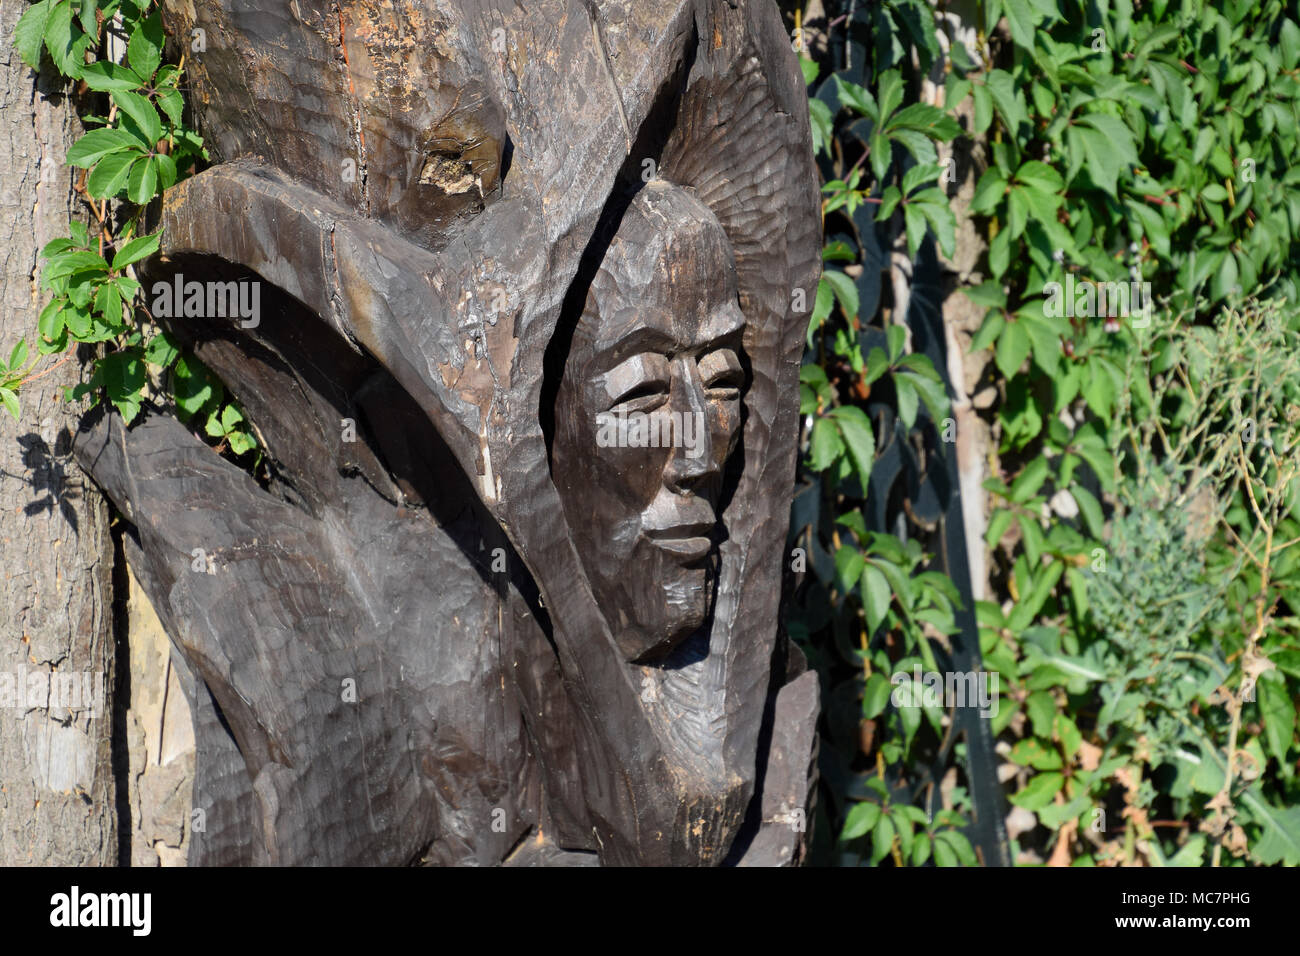 Wooden idol. Woodcarving. Man's face is carved on the trunk of a log Stock Photo